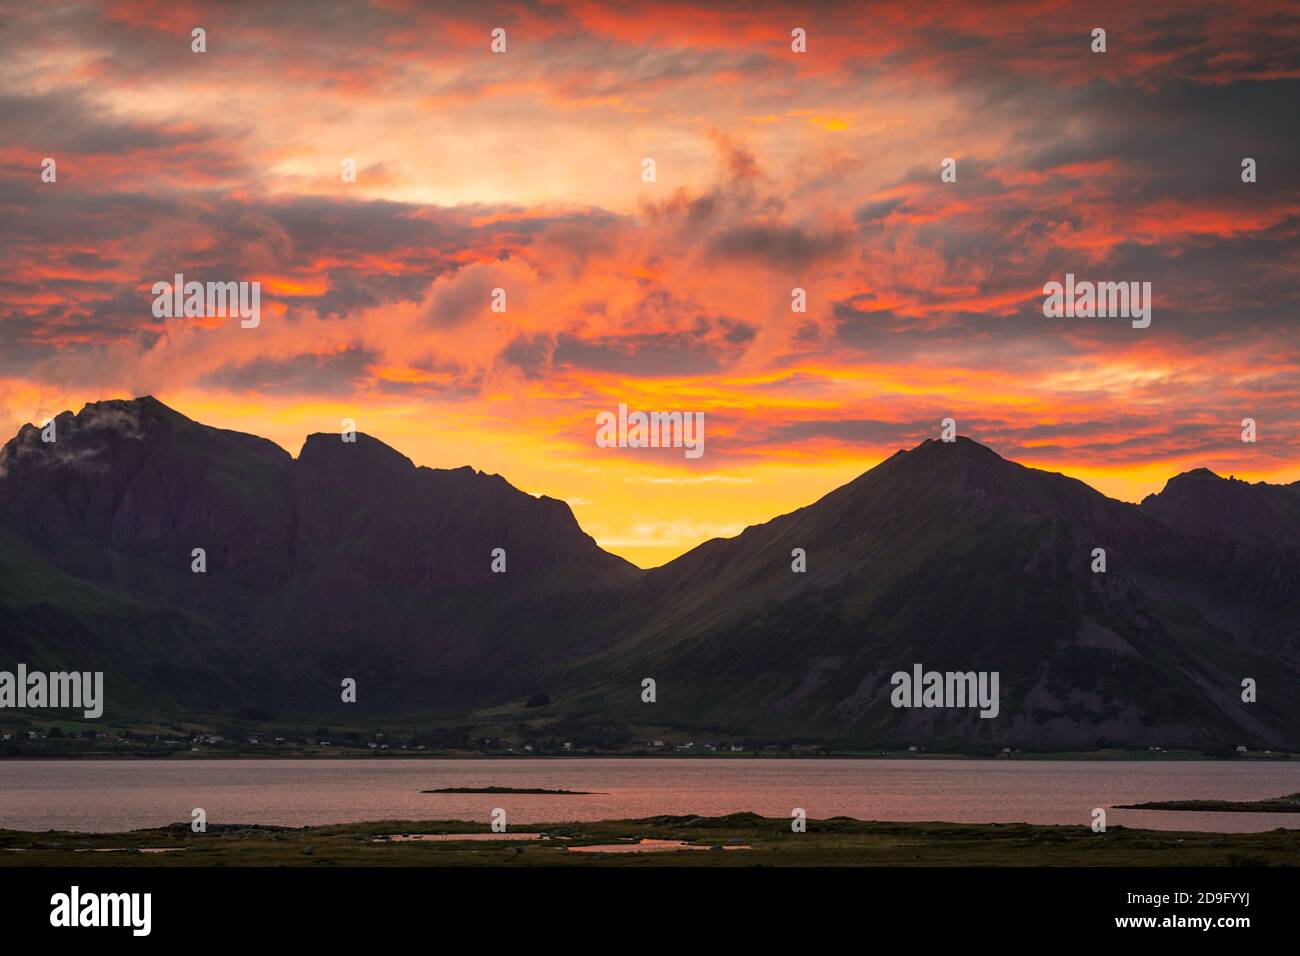 Colorful sunset over mountains in Lofoten Norway Stock Photo